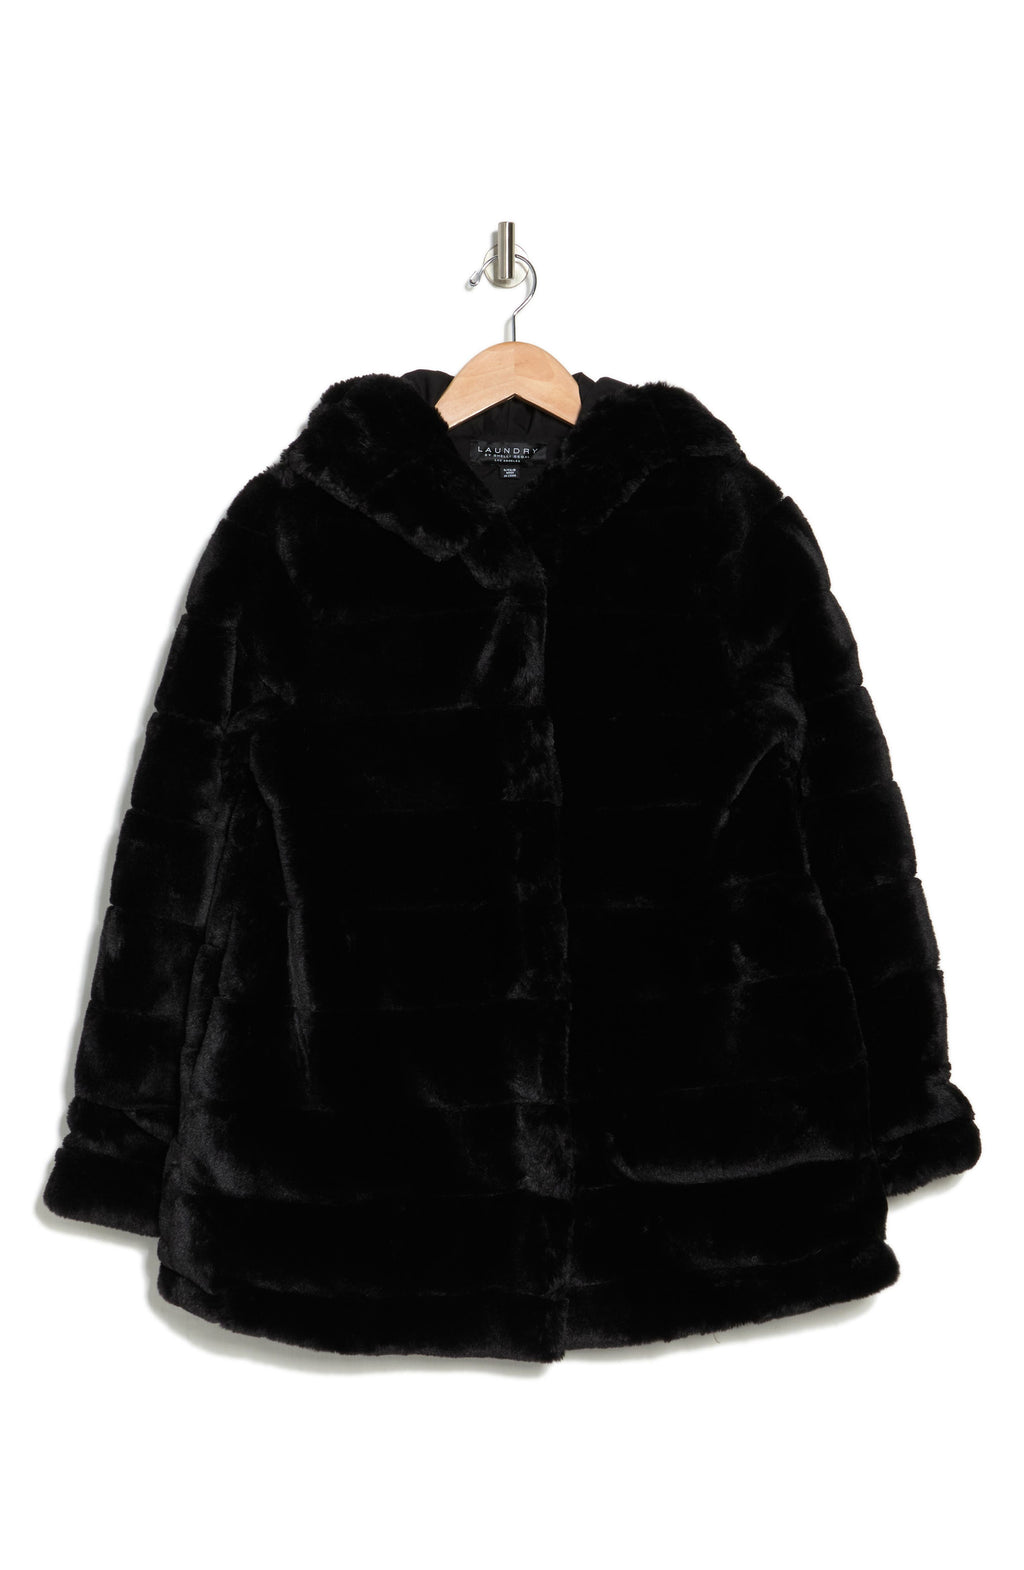 LAUNDRY BY SHELLI SEGAL Hooded Faux Fur Coat, Main, color, BLACK